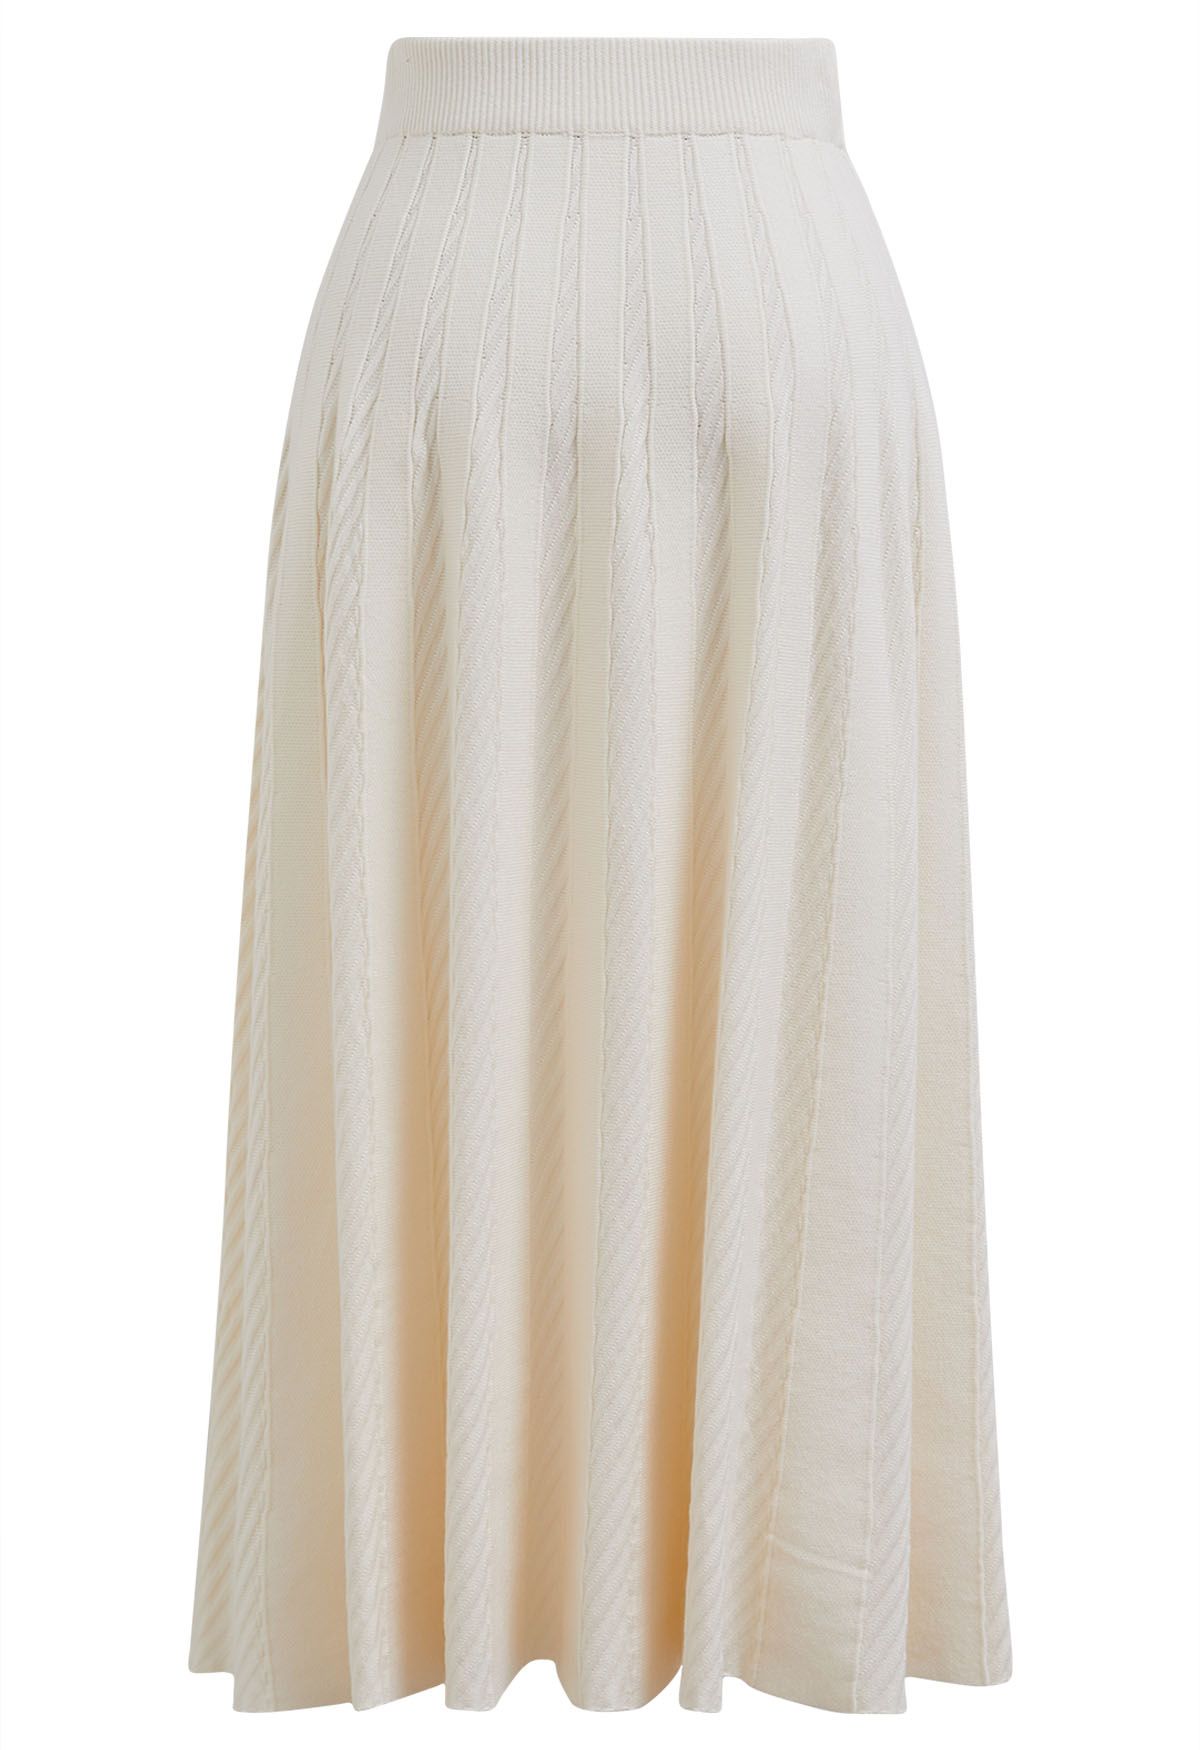 Diagonal Ribbed Pleated Knit Skirt in Cream